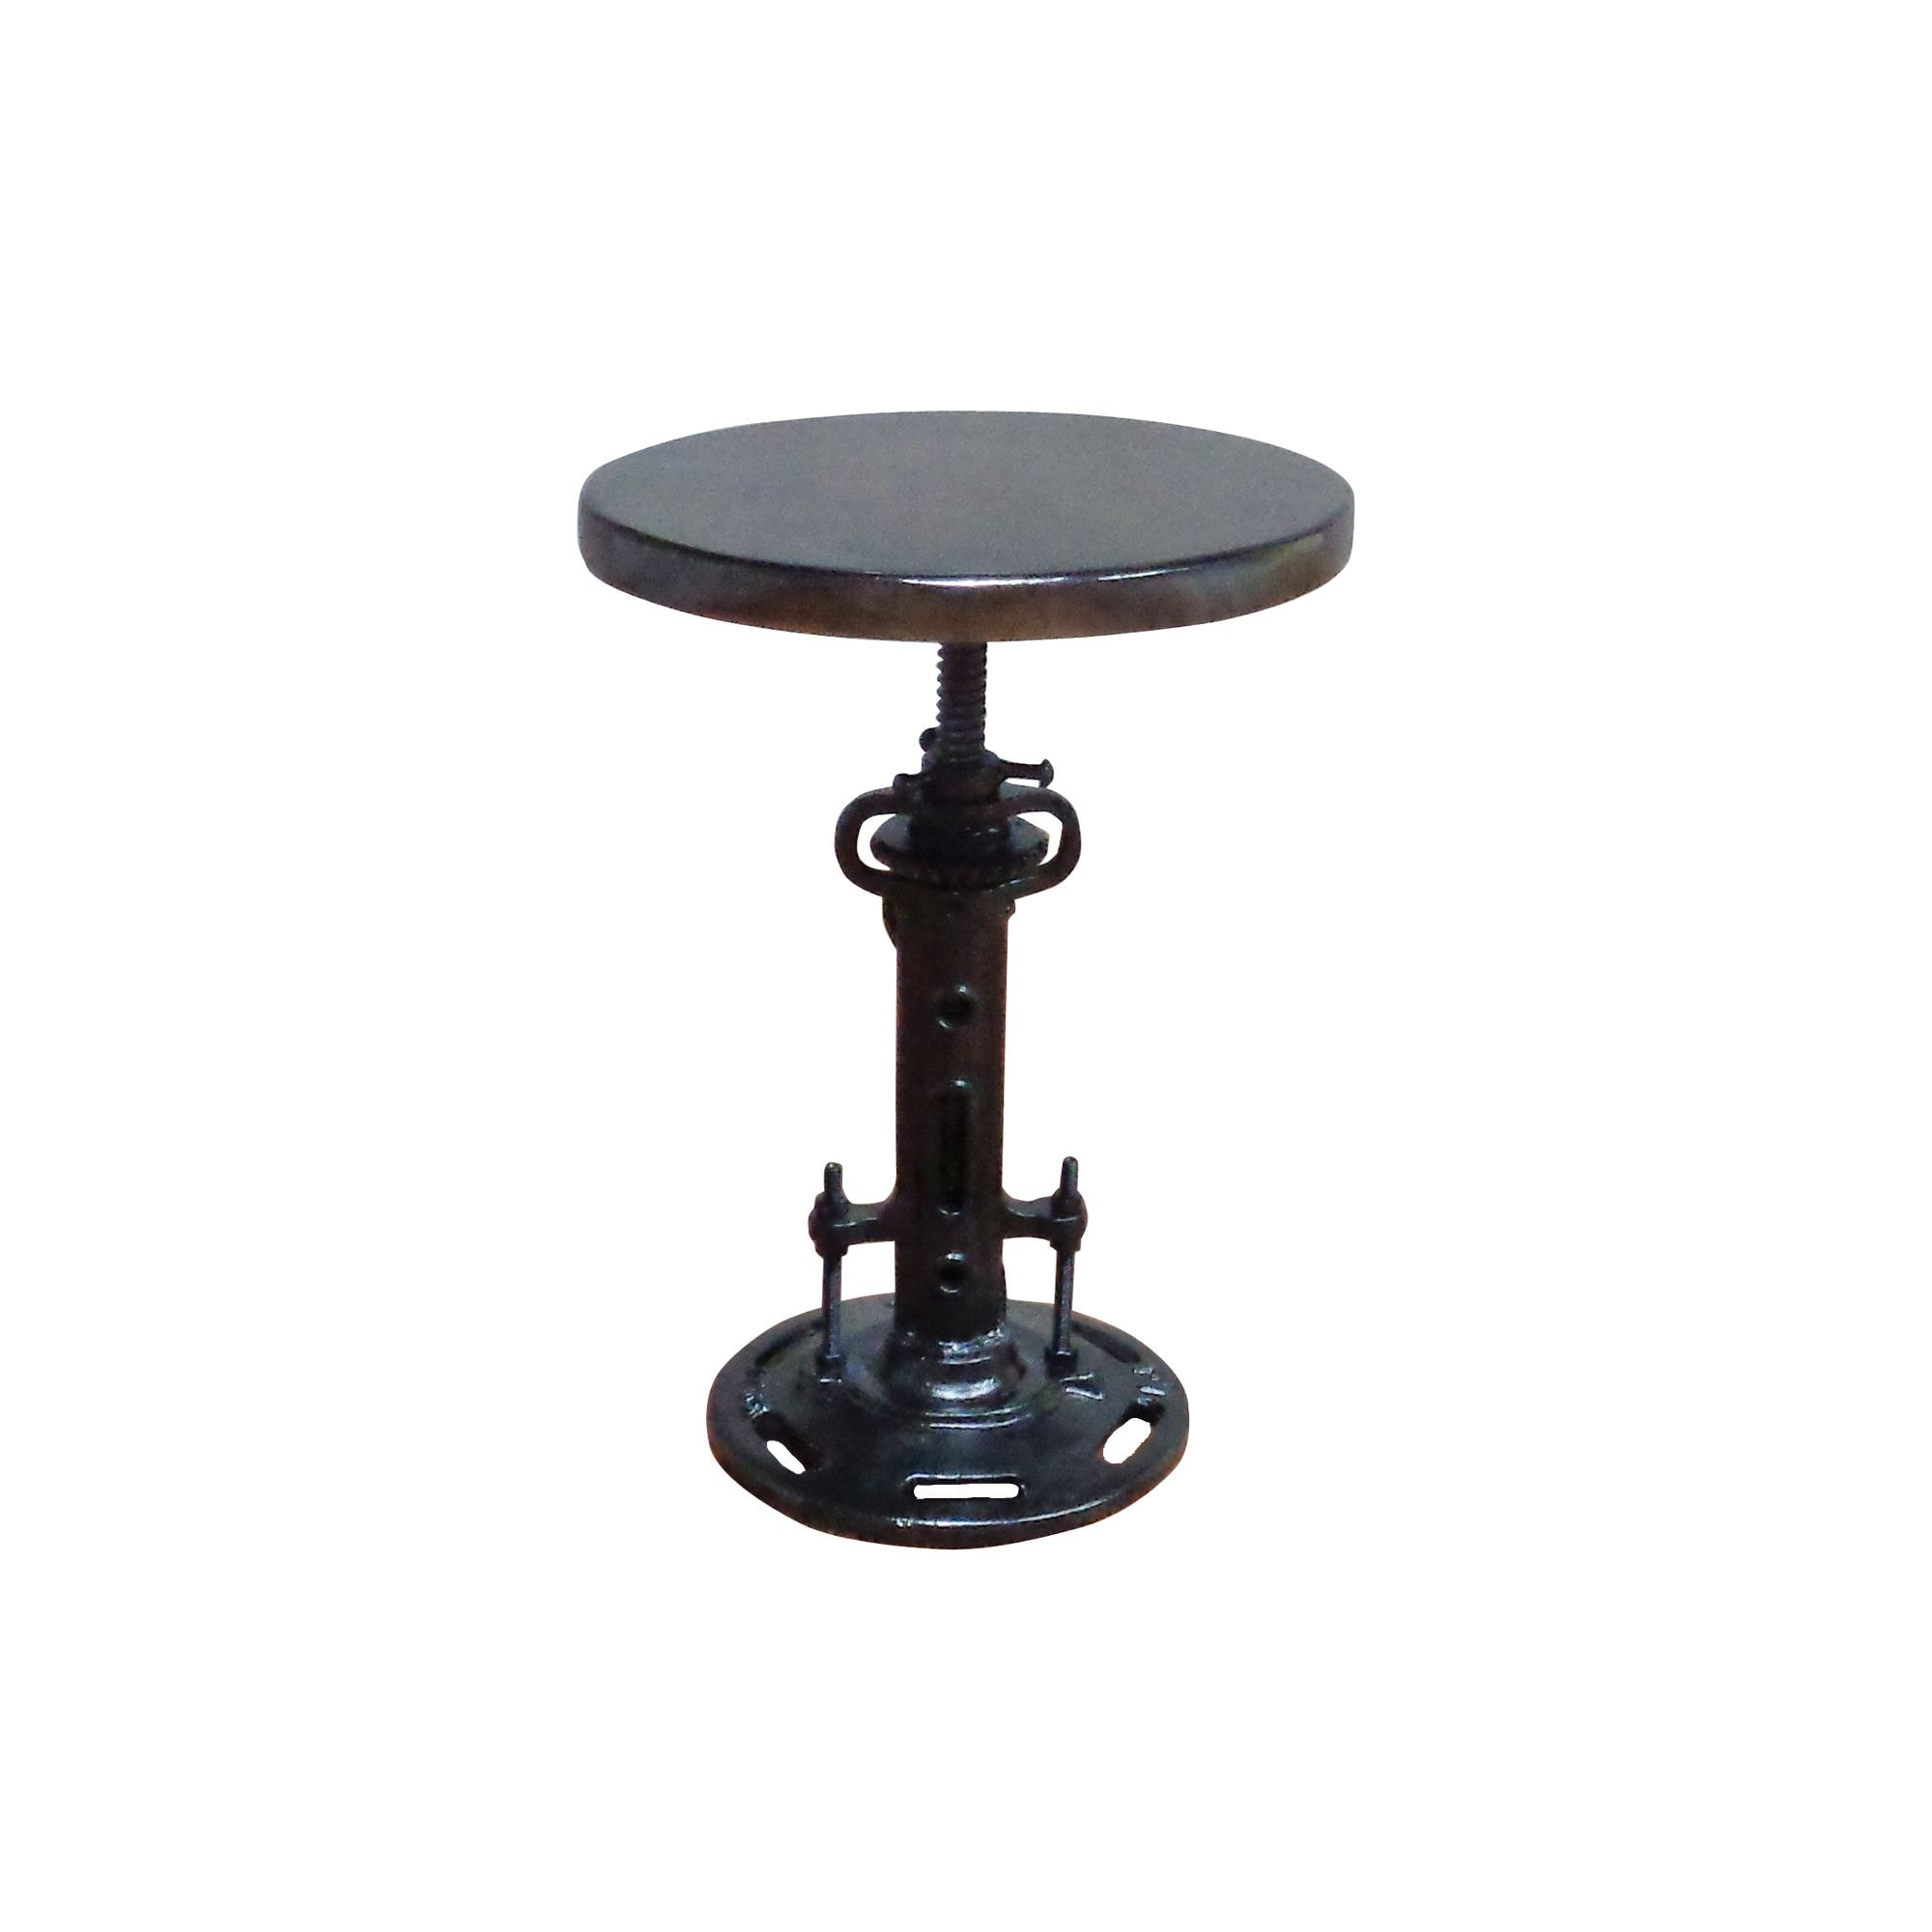 Laddha Home Designs 14 inch Black and Walnut Brown Industrial Style Mango Wood Stool